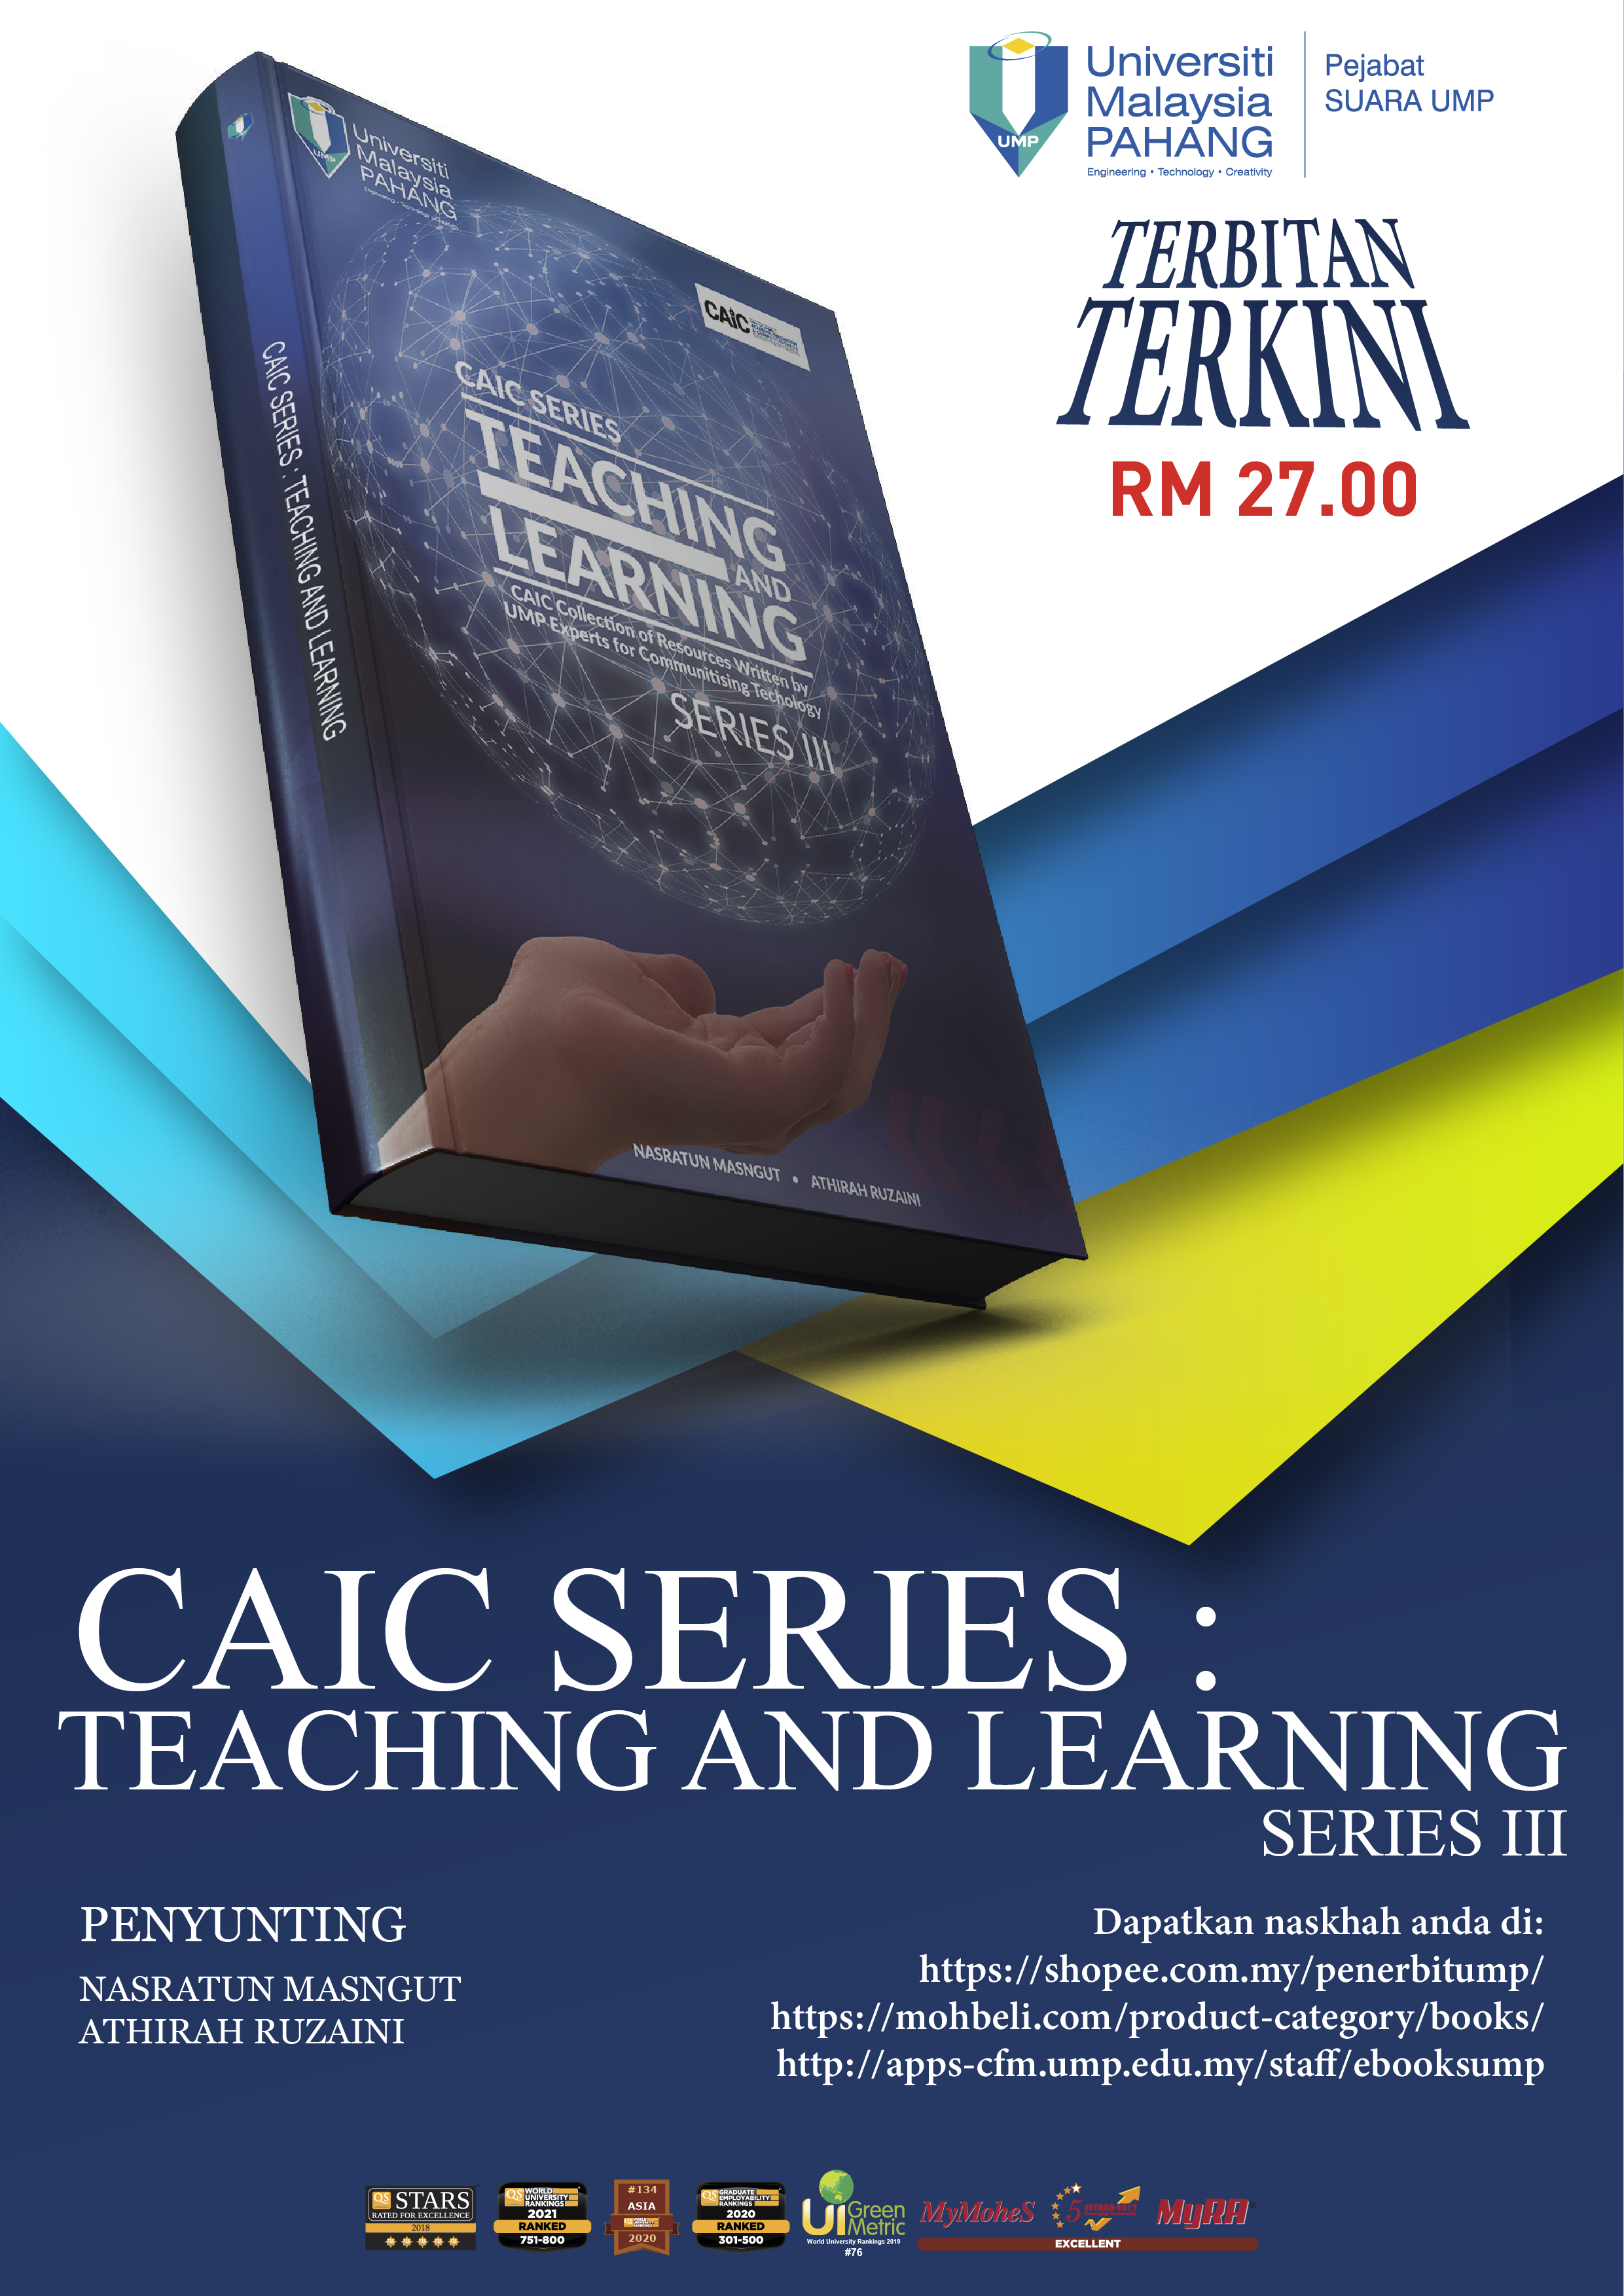 CAIC SERIES: Teaching and Learning: CAIC Collection of Resources Written by UMP Experts for Communitising Technology  (3rd Series)